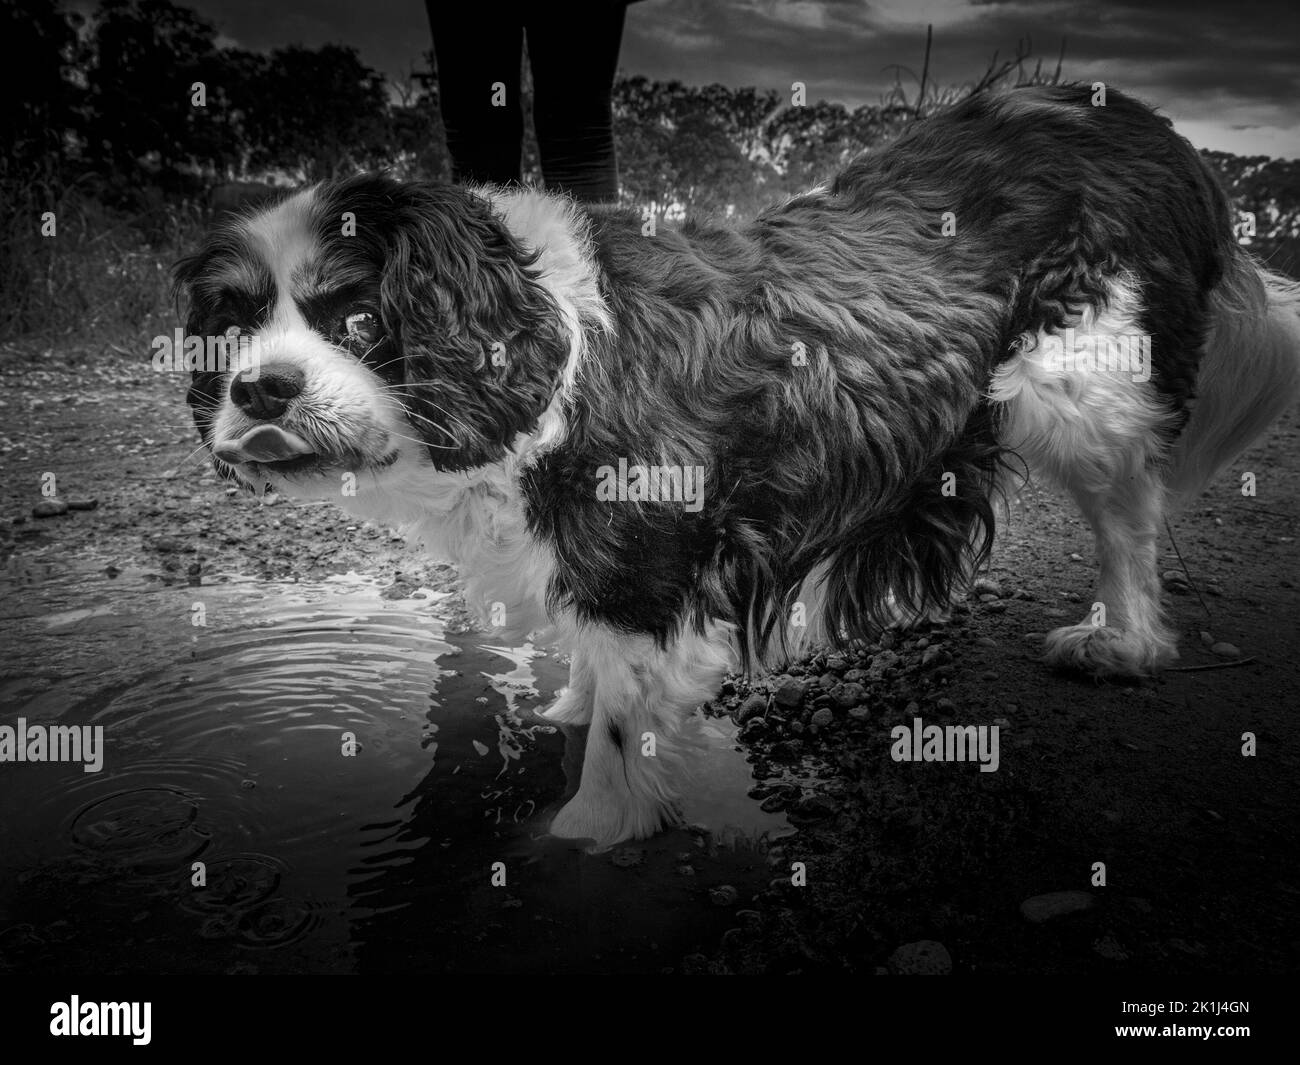 Cavalier King Charles spaniel (Canis familiaris) interrupting its drinking from a puddle to cast a baleful eye on the photographer. Stock Photo